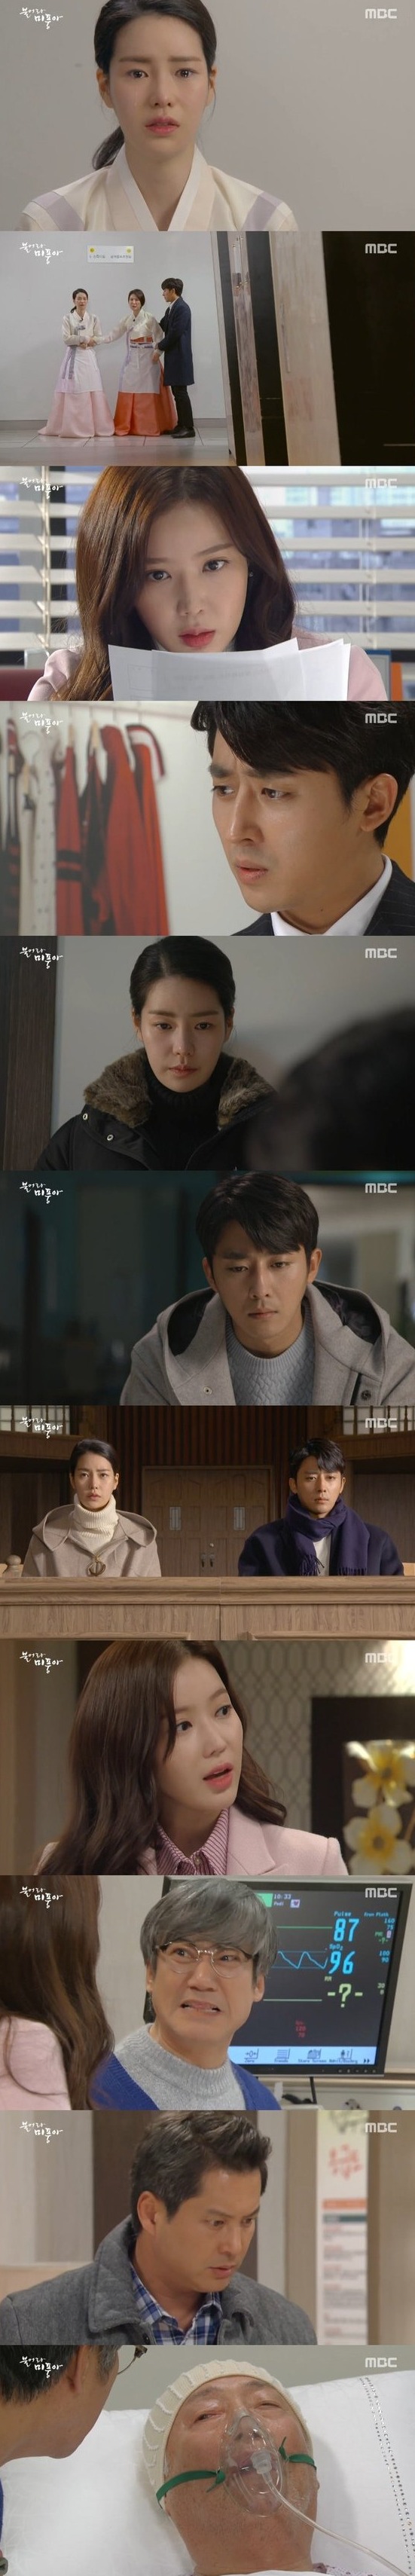 episodes 48 and 49 captures for the Korean drama 'Blow Breeze'